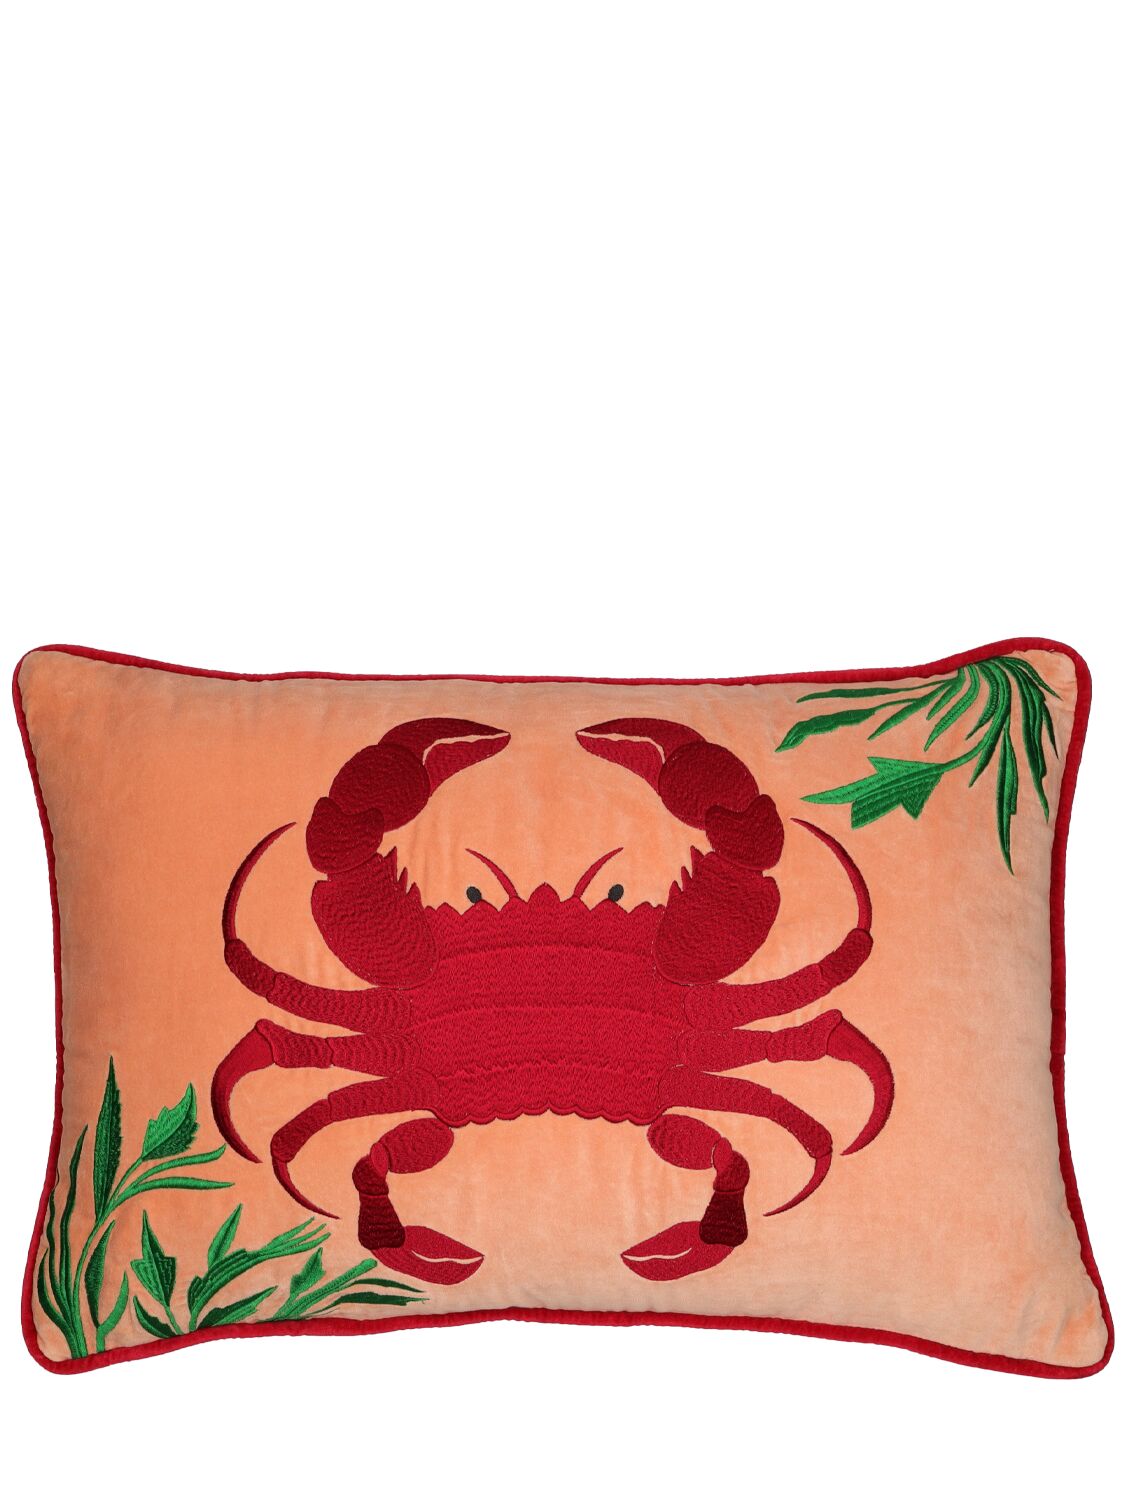 Les Ottomans Hand-embroidered Cotton Velvet Cushion In Pink